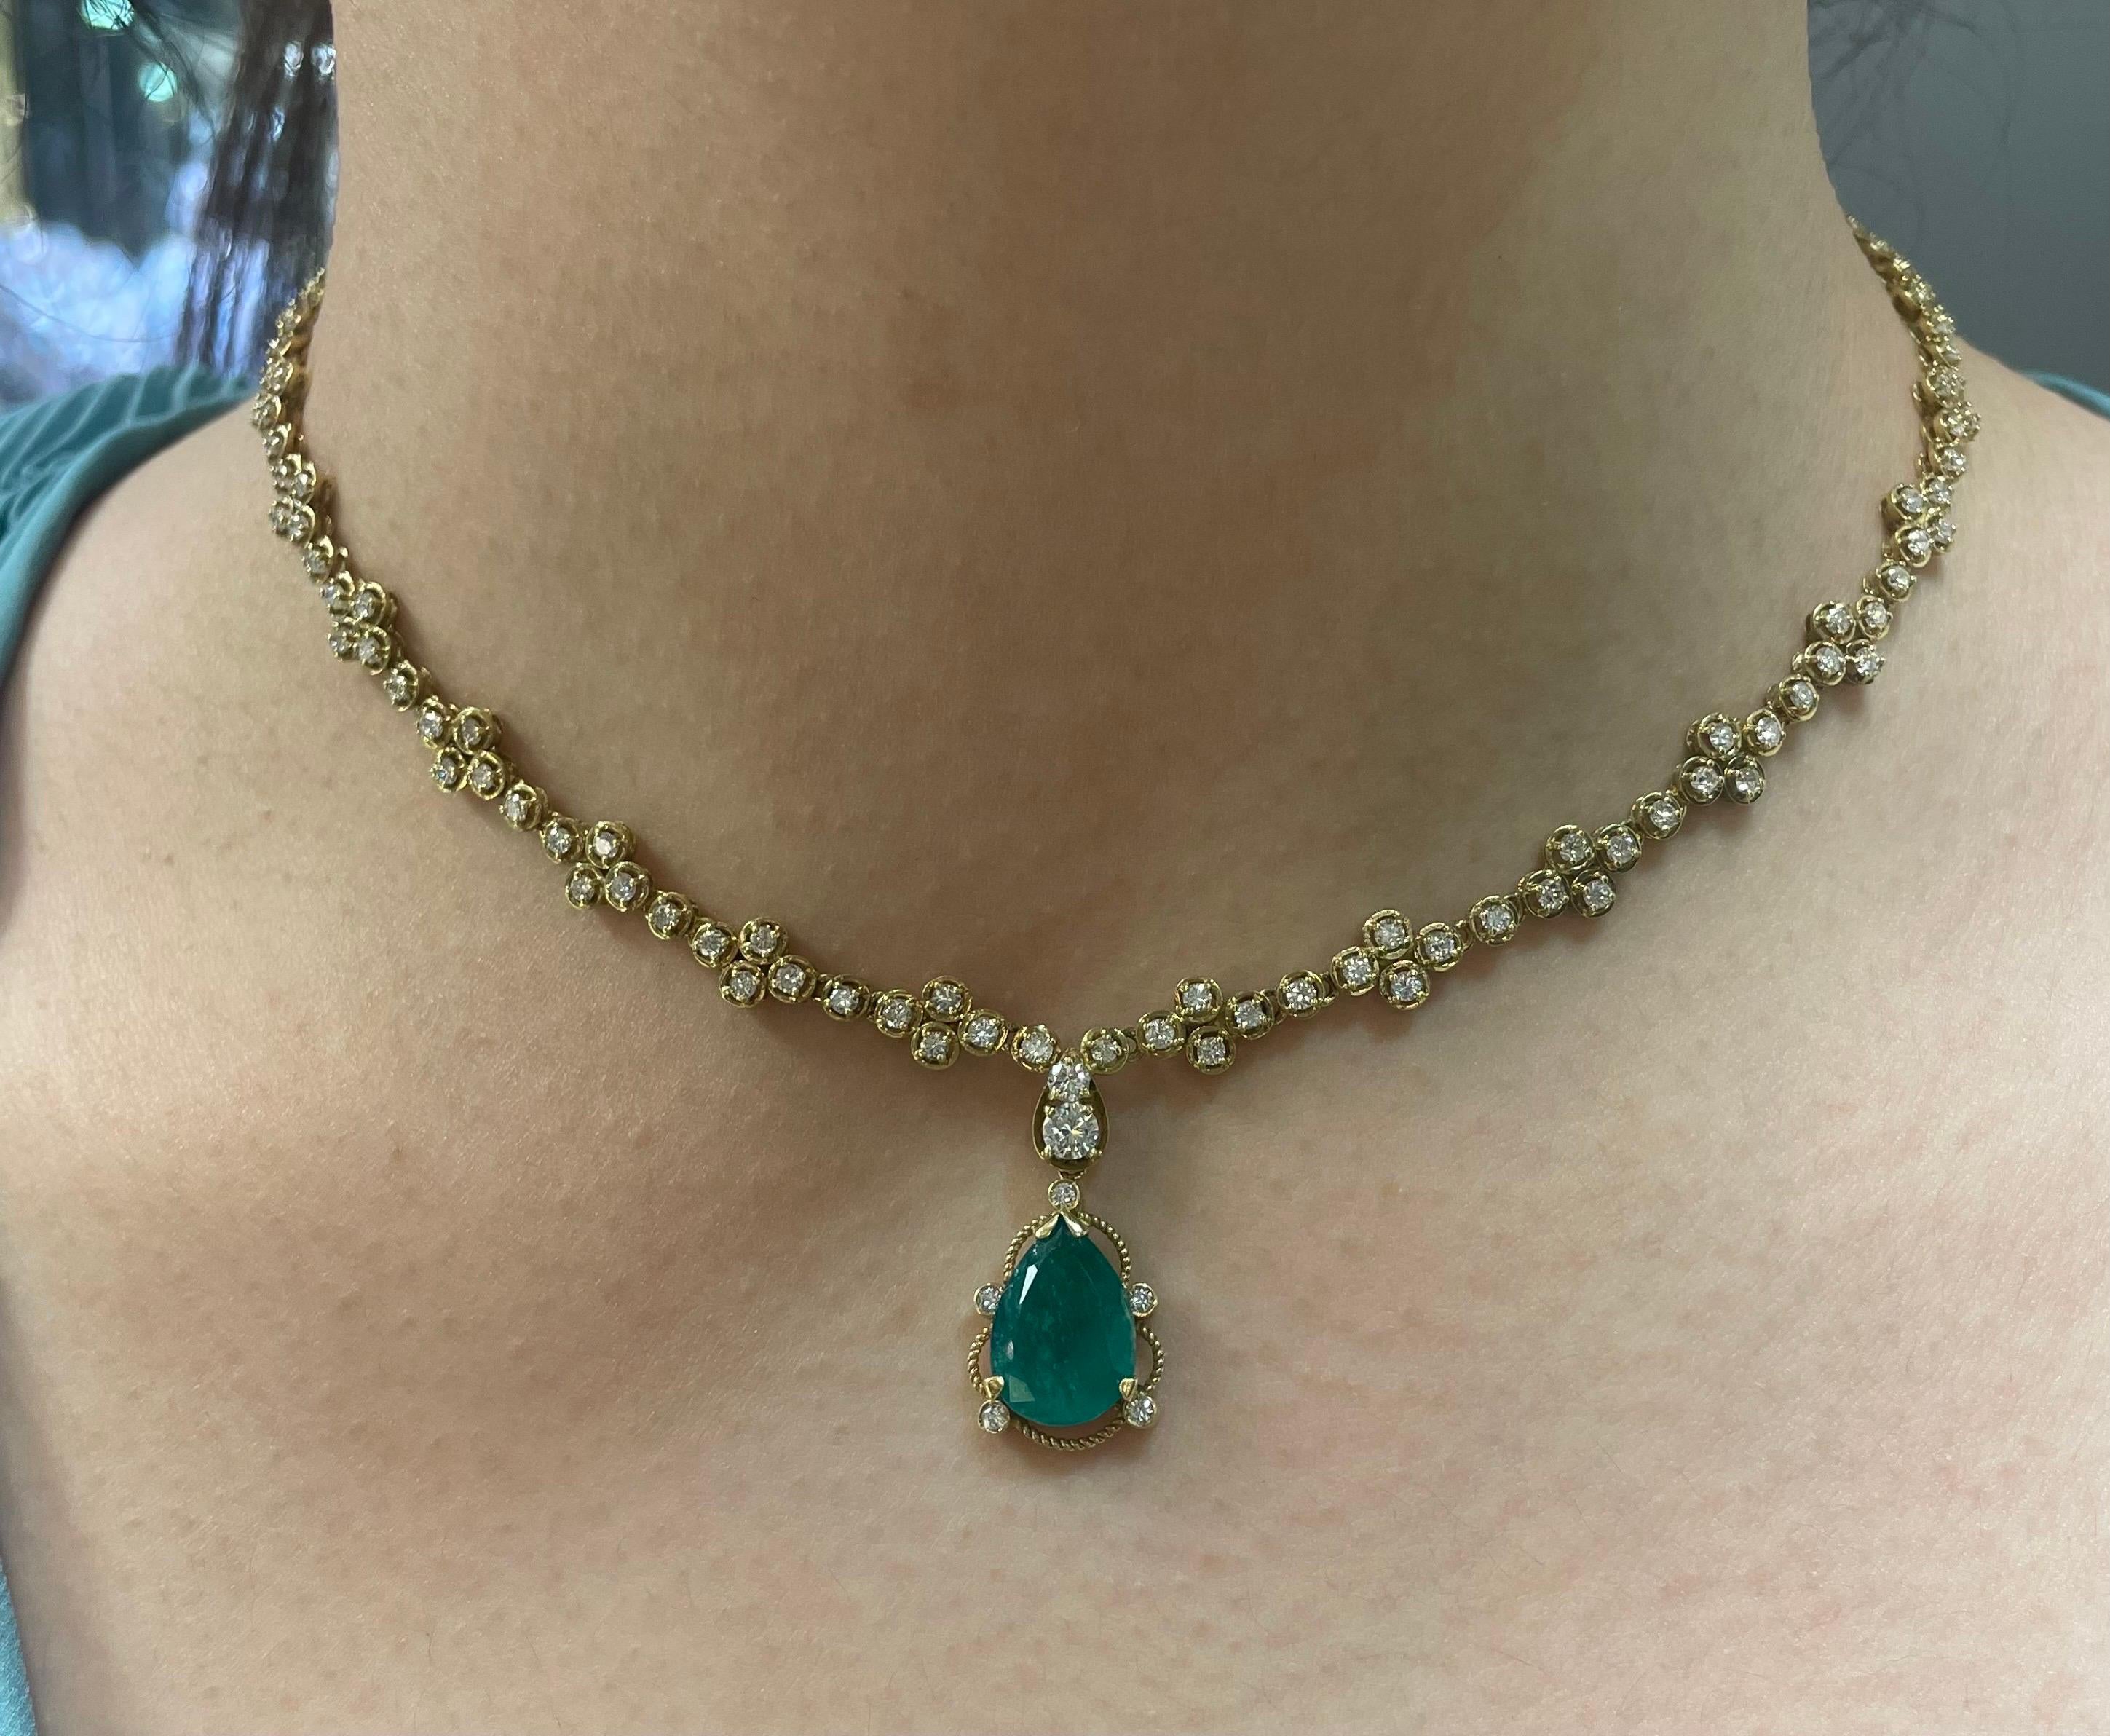 Emerald and Diamond Pendant Necklace

A necklace adorned with round-cut diamonds and a pear-shaped emerald drop. 

Approximate Emerald Weight: 3 carats

Approximate Measurements: 
Chain Length: 16